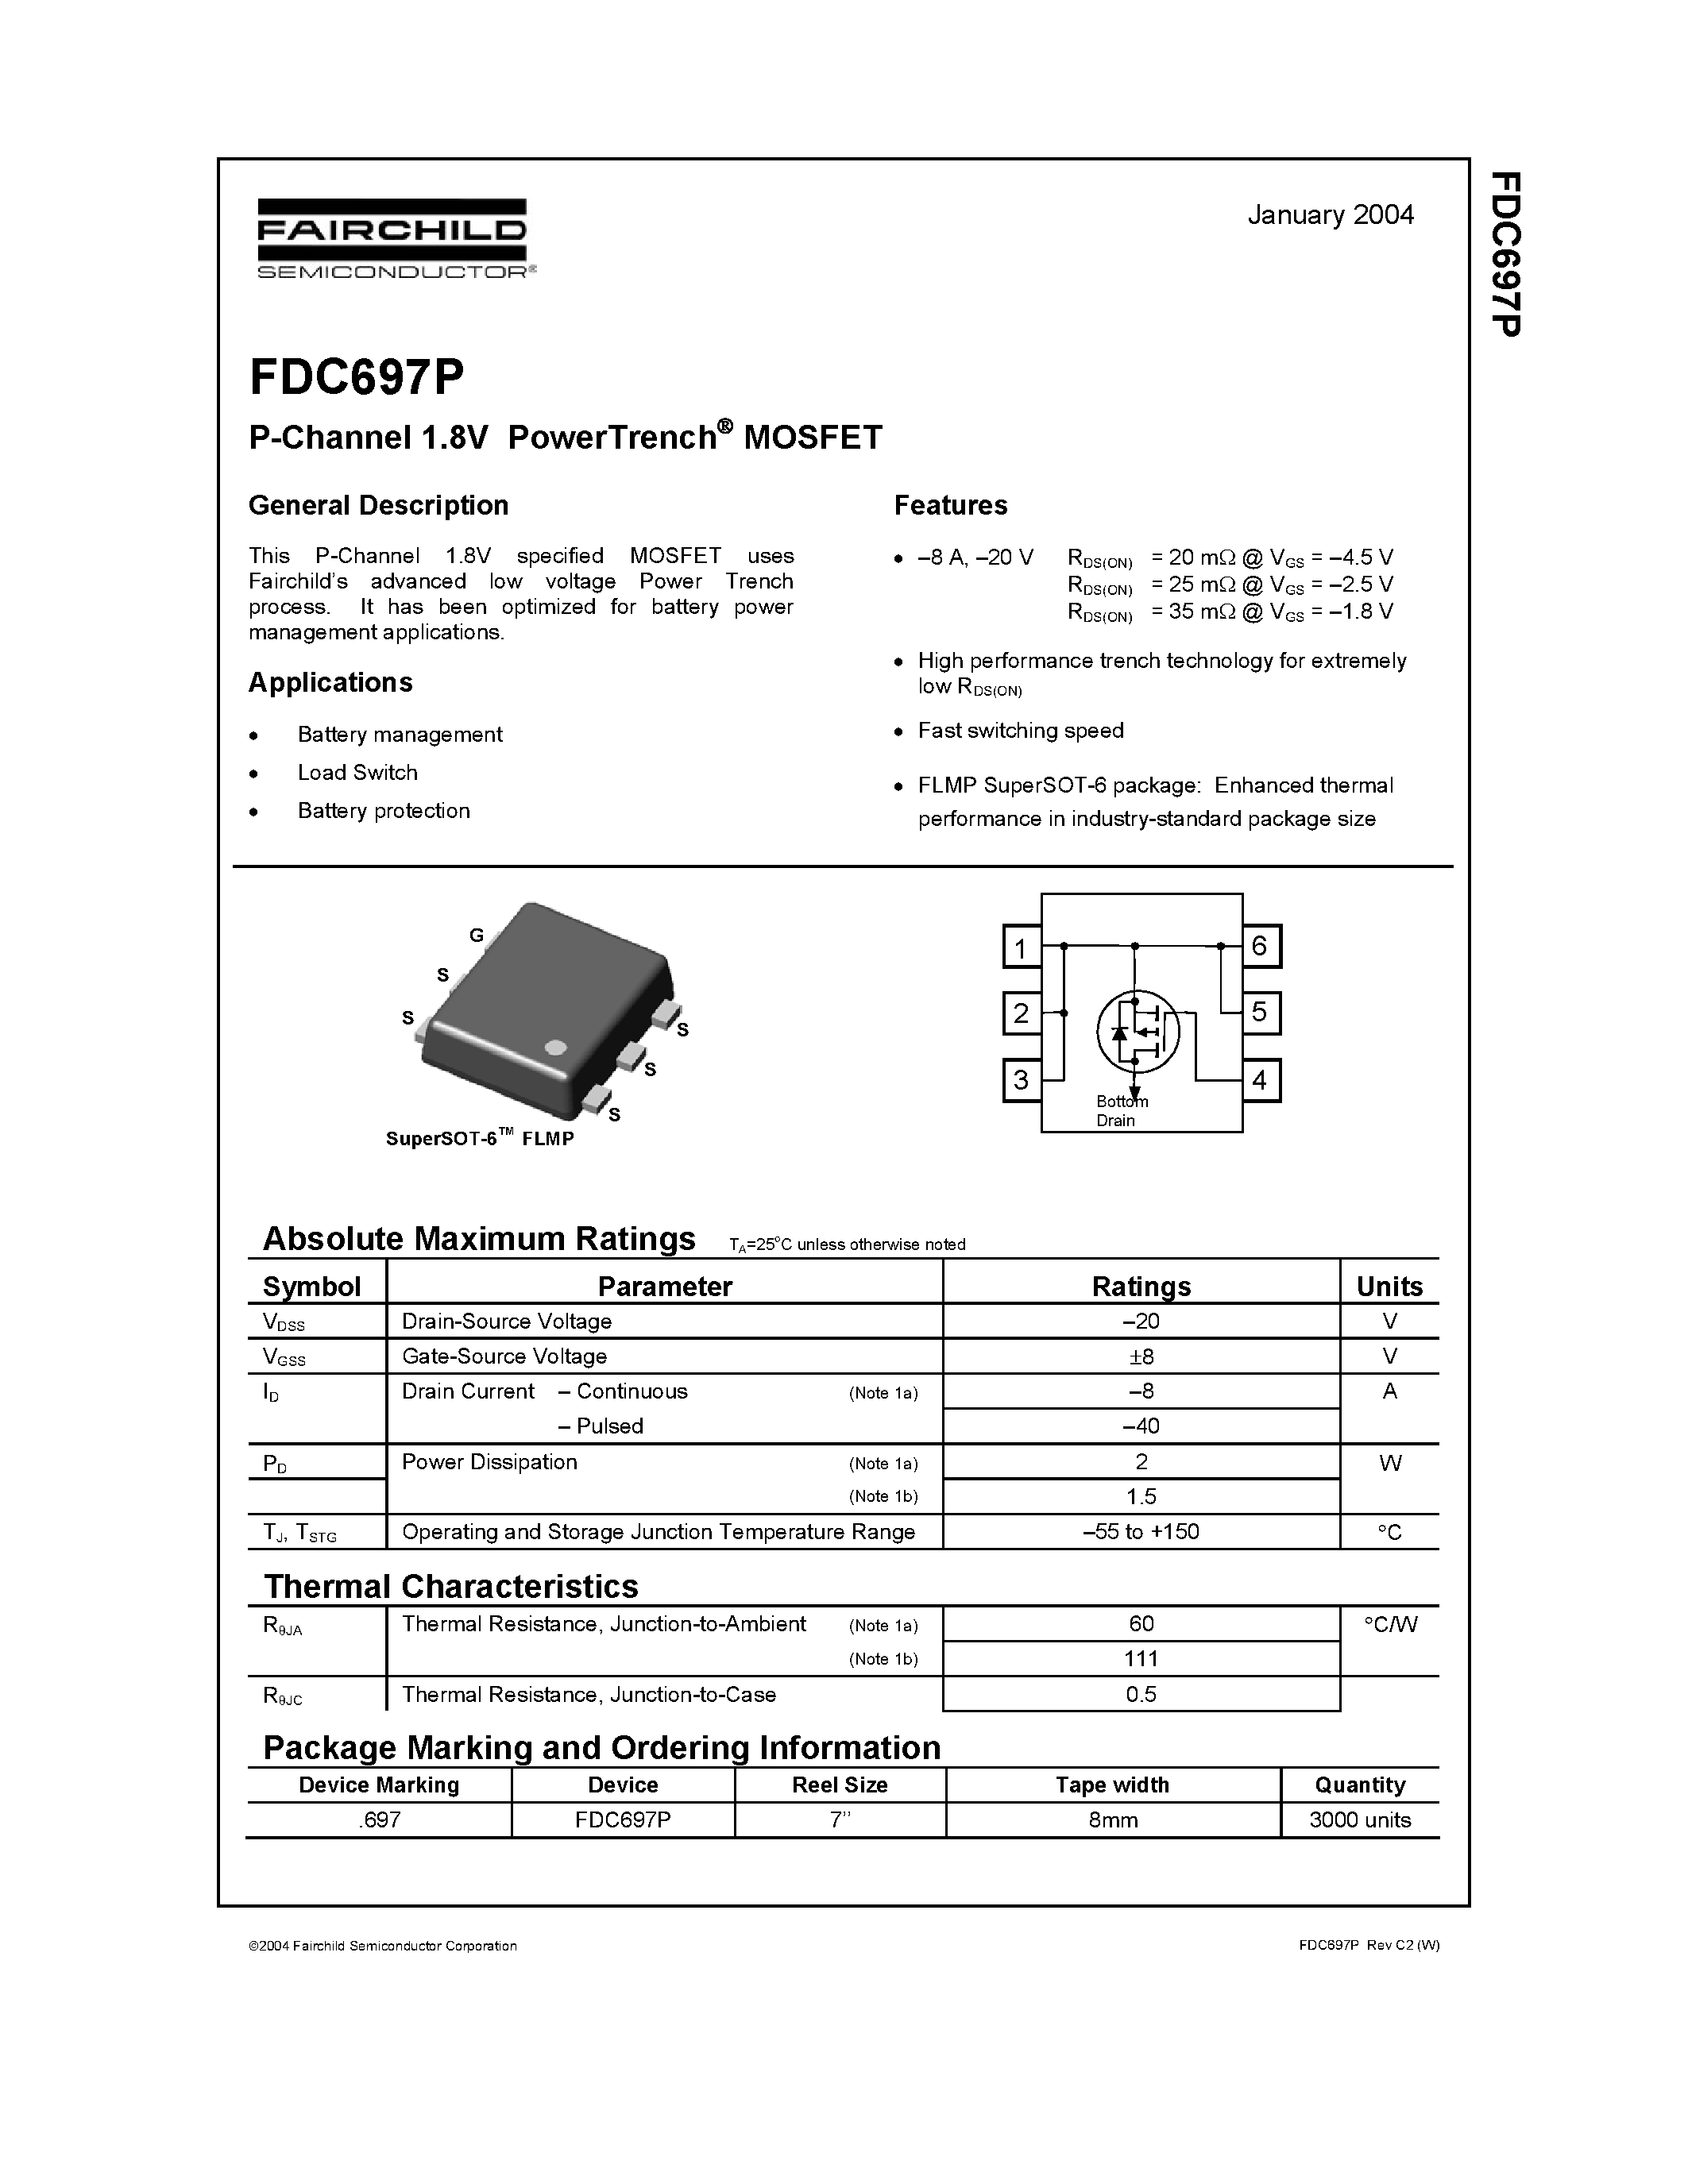 Datasheet FDC697P - P-Channel 1.8V PowerTrench MOSFET page 1